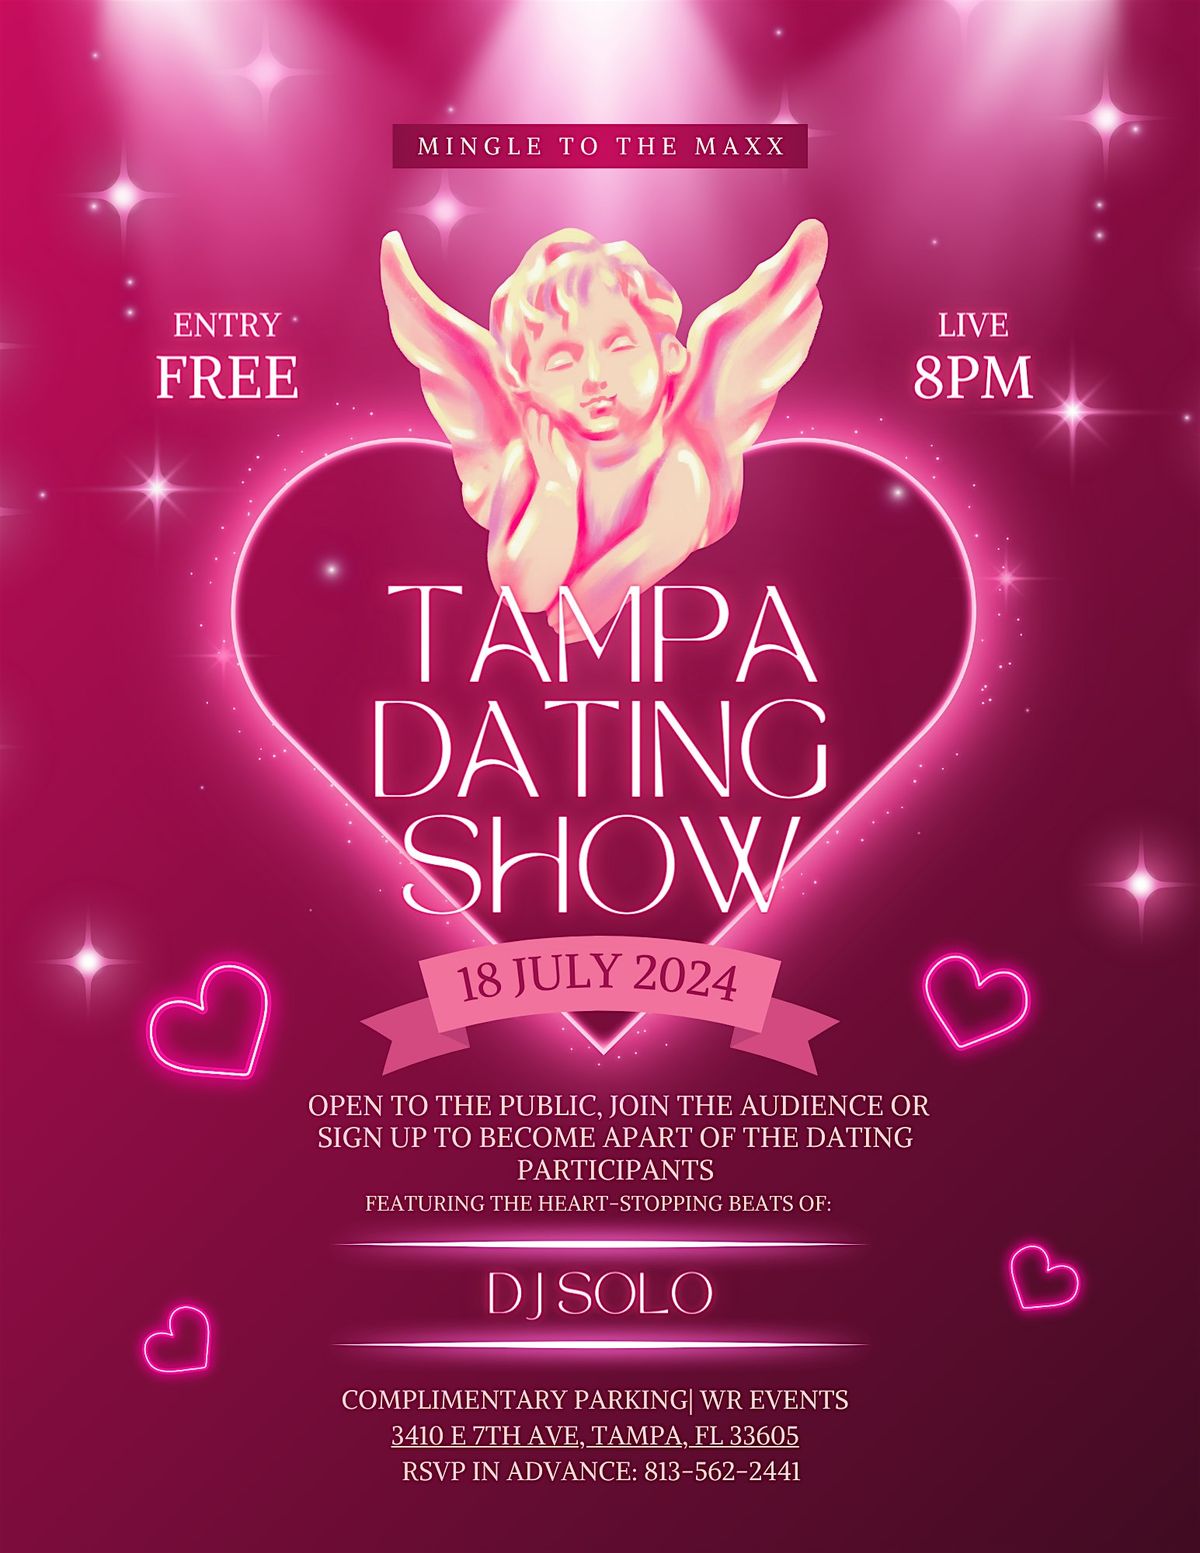 Mingle to the Maxx Tampa Dating Show